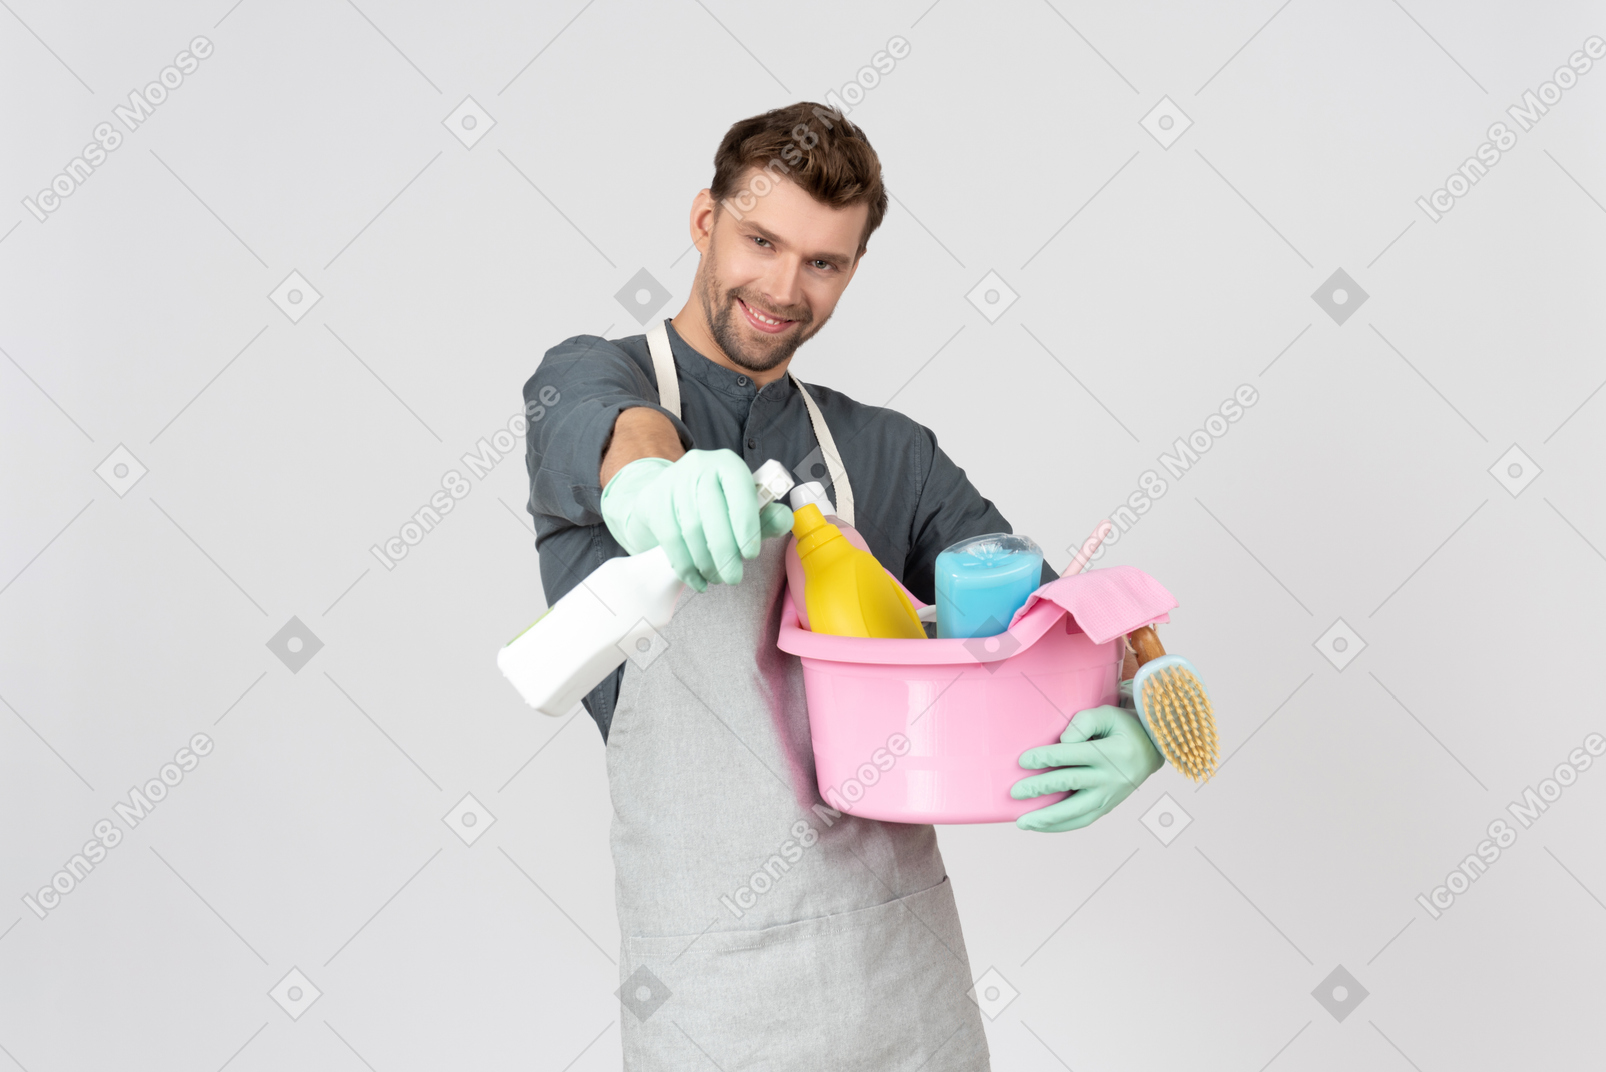 Accepting huge cleaning like a game